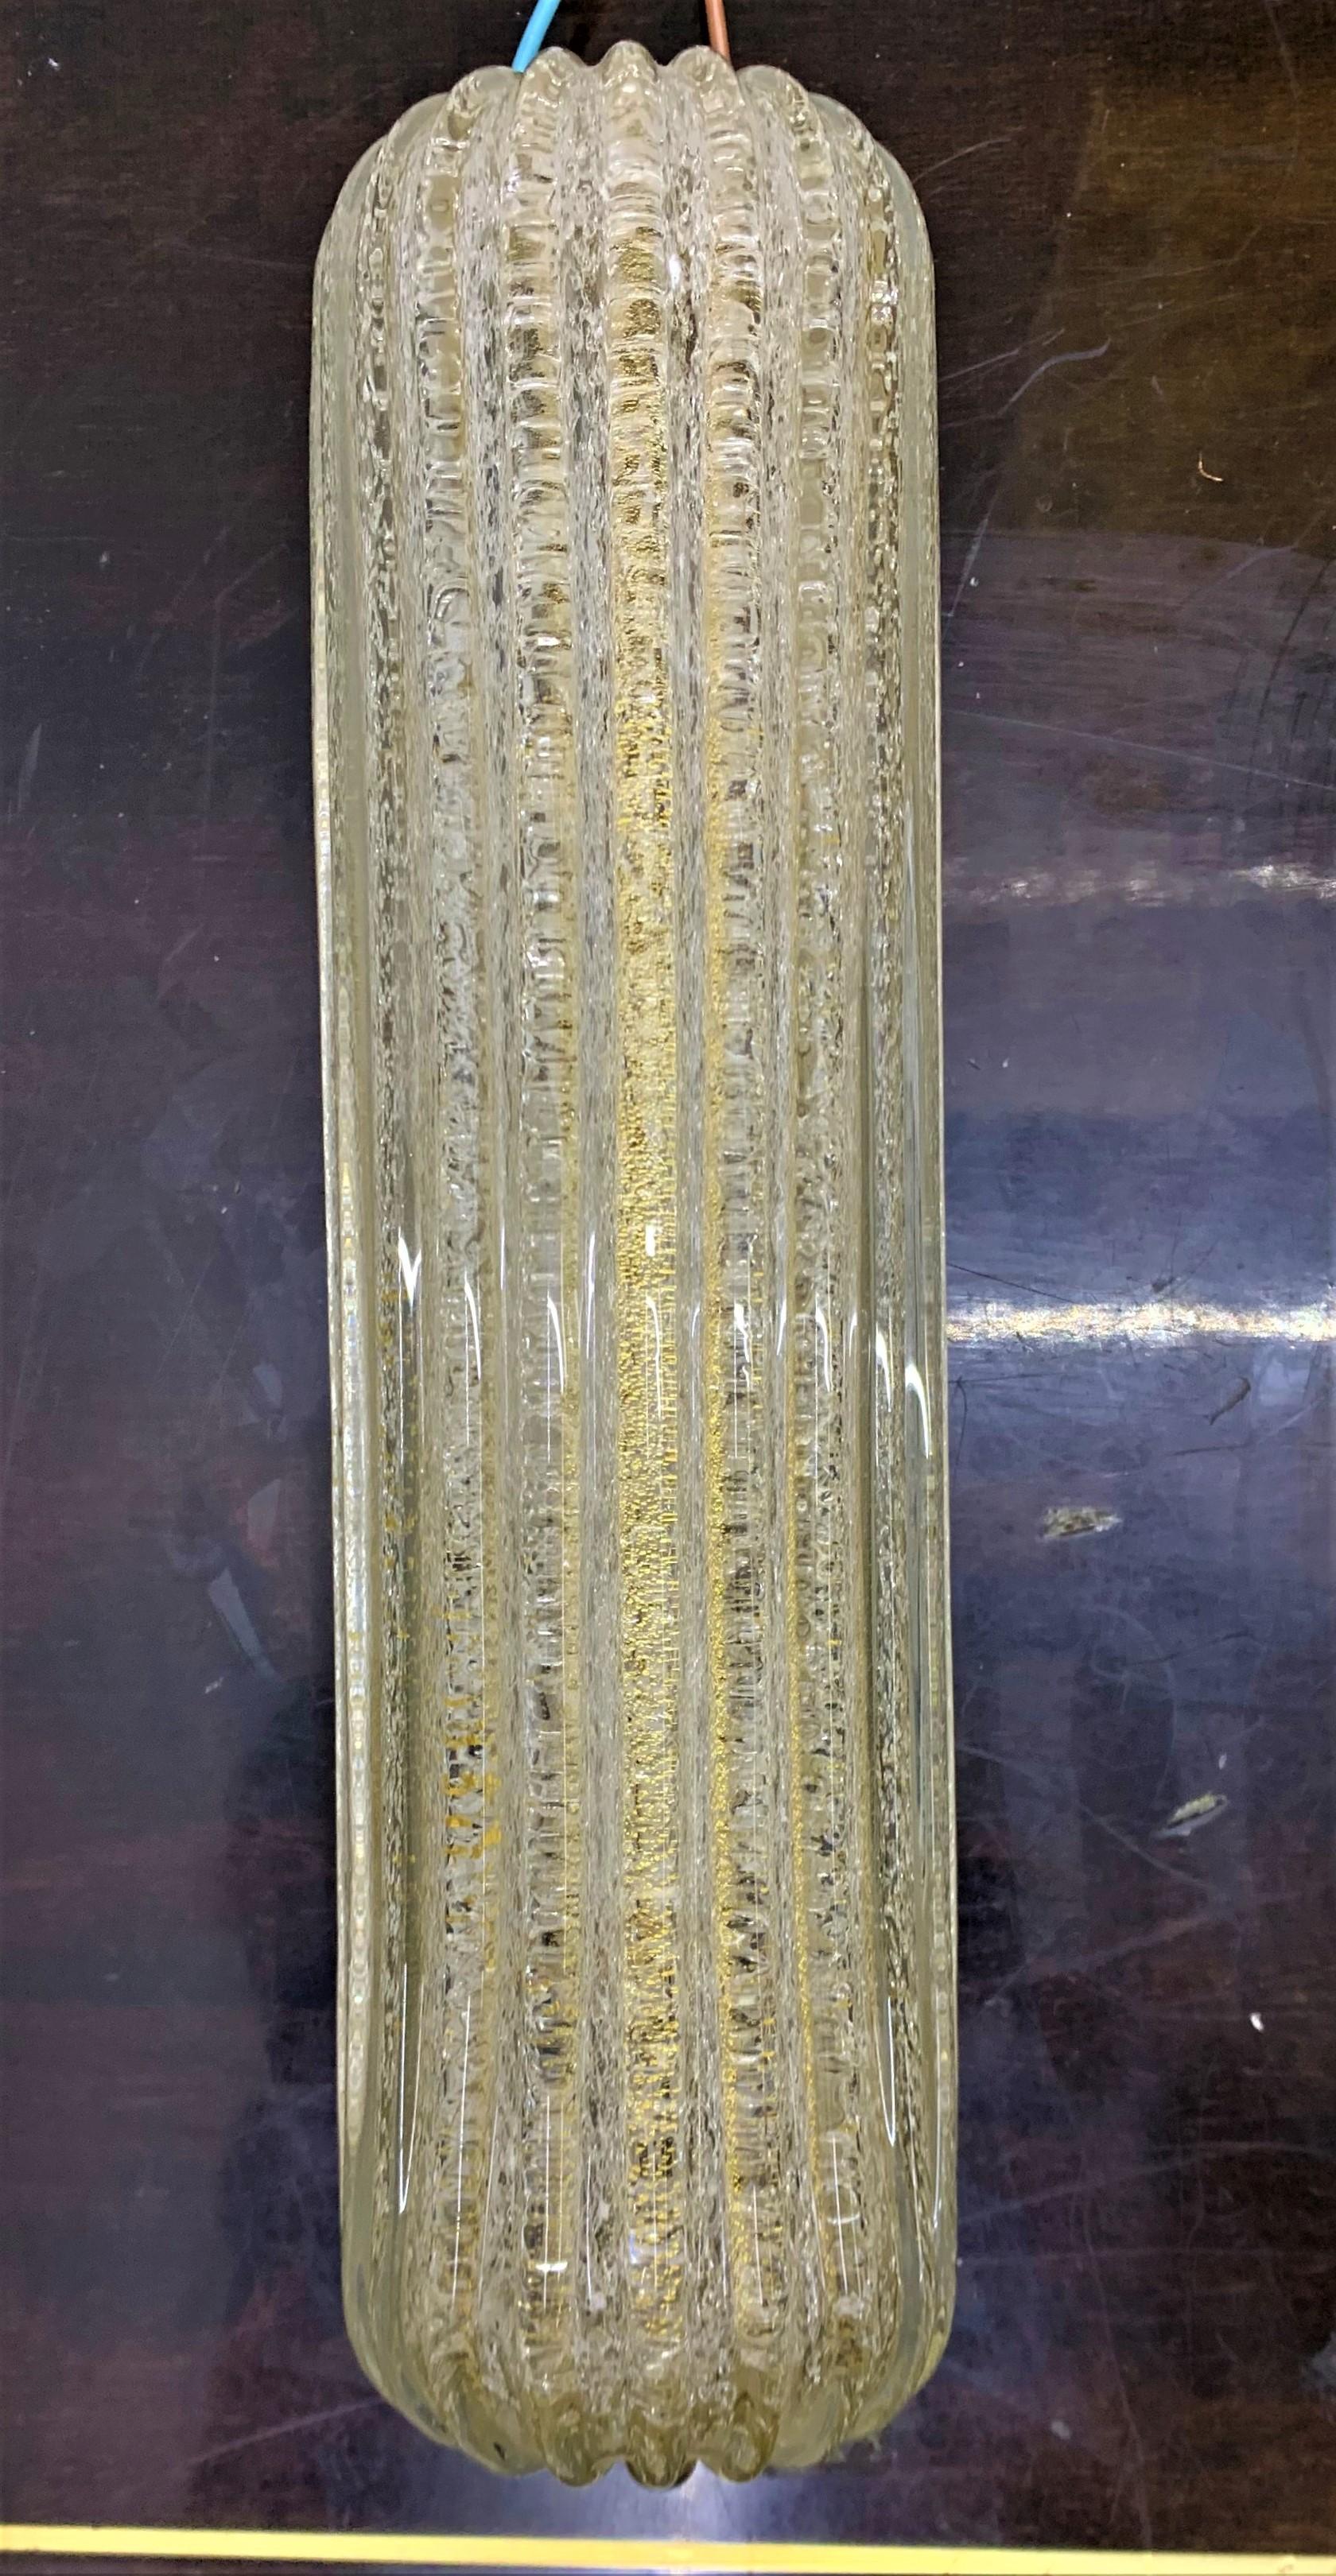 Pair of Mid-Century Modern wall lights or sconces manufactured in brass, iron and clear Murano glass with gold inclusions by Barovier & Toso in Murano Italy, circa 1960
Both still retaining original paper labels.
They're both the same size. Due to